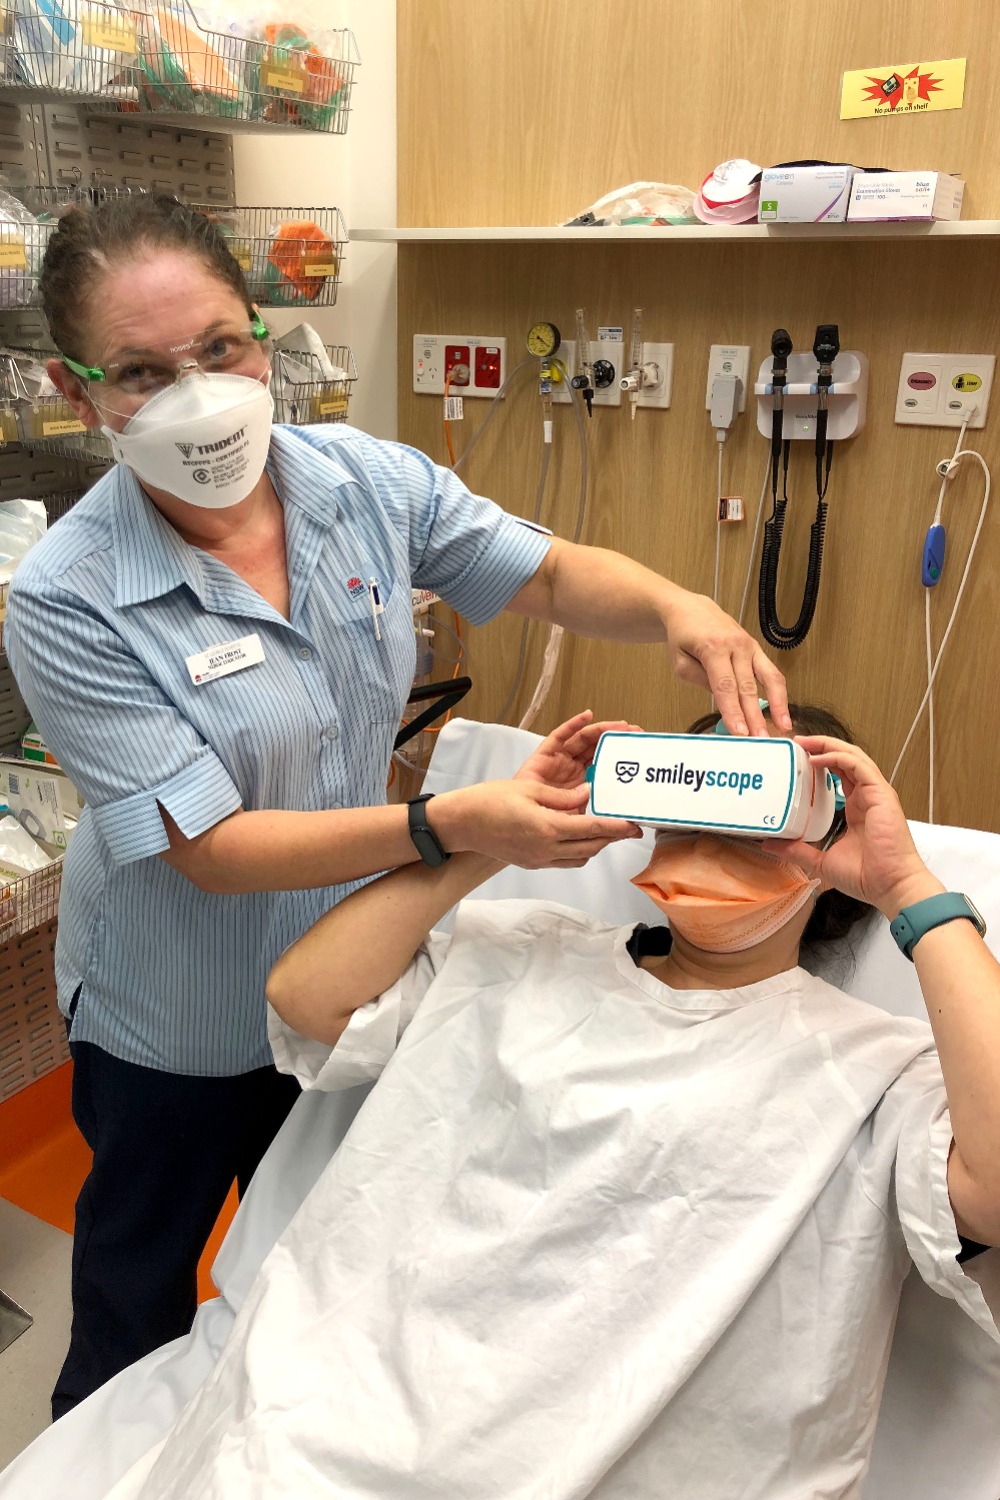 Staff and patient using the Smileyscope 